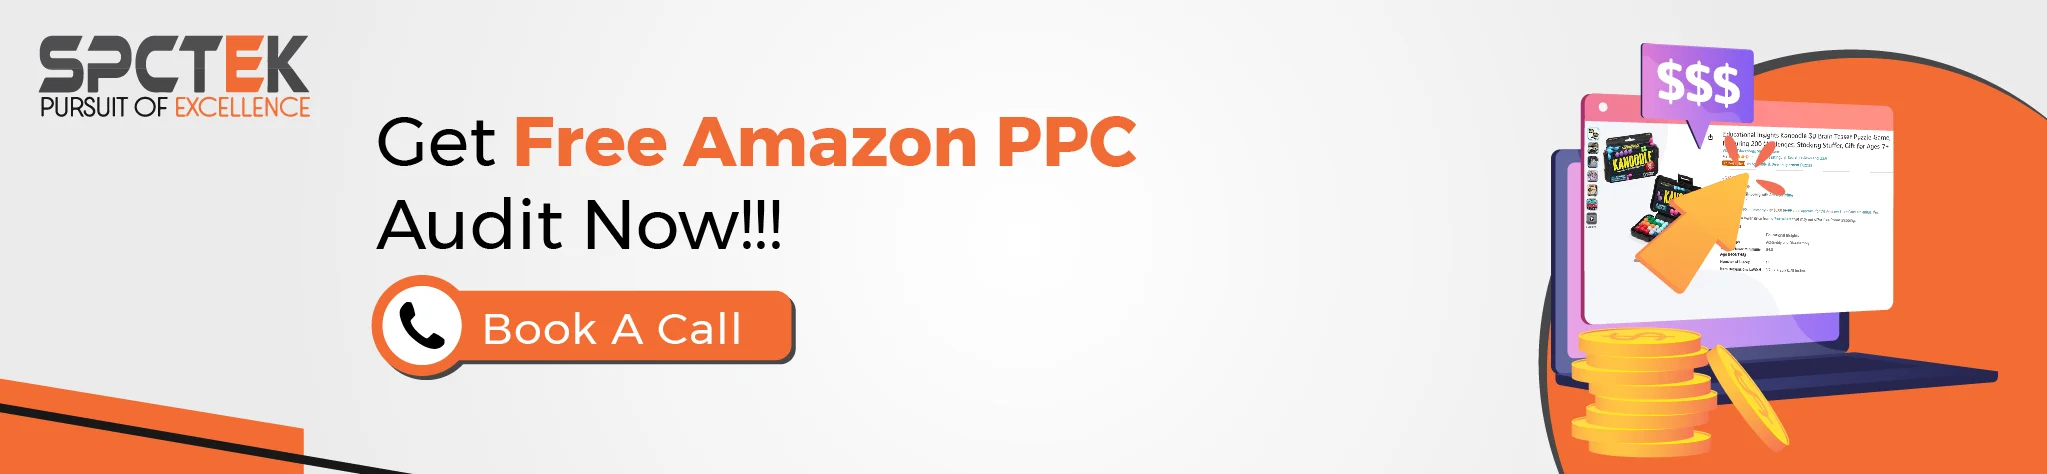 Amazon PPC Everything you need to know